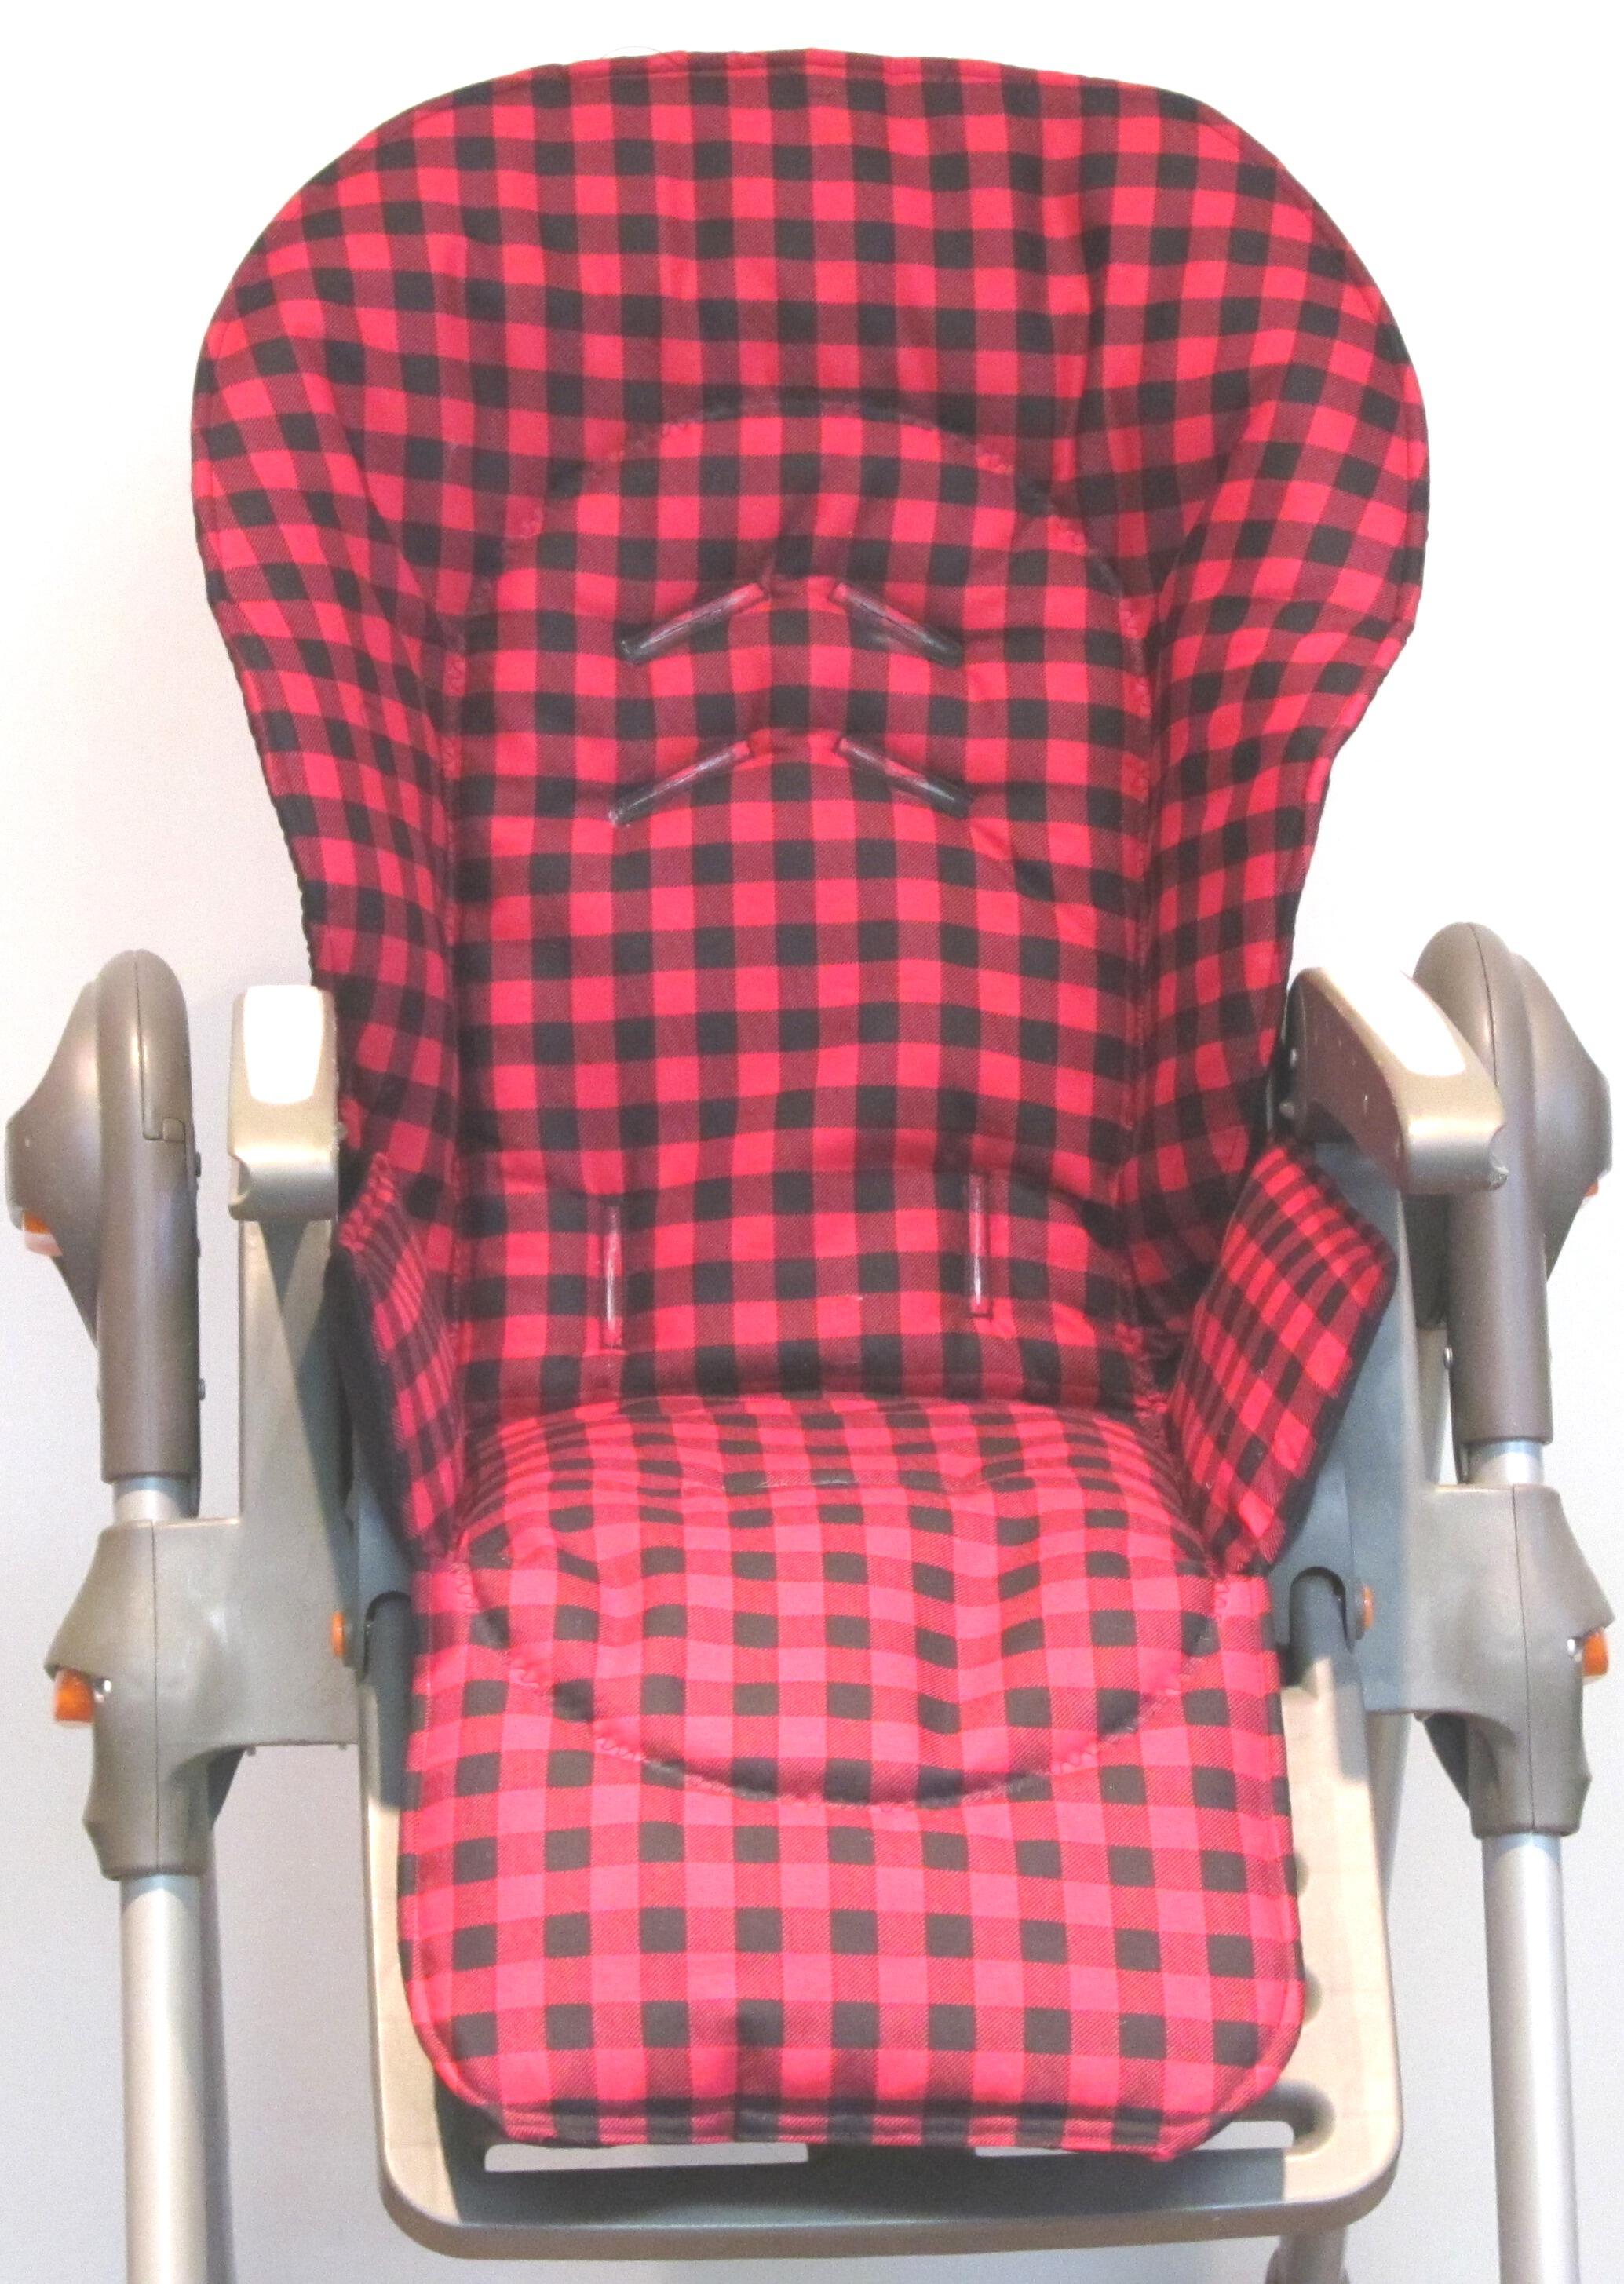 red and black checked custom padded replacement high chair cover, kids furniture protector for the polly and duodiner DLX 6-in-1chair